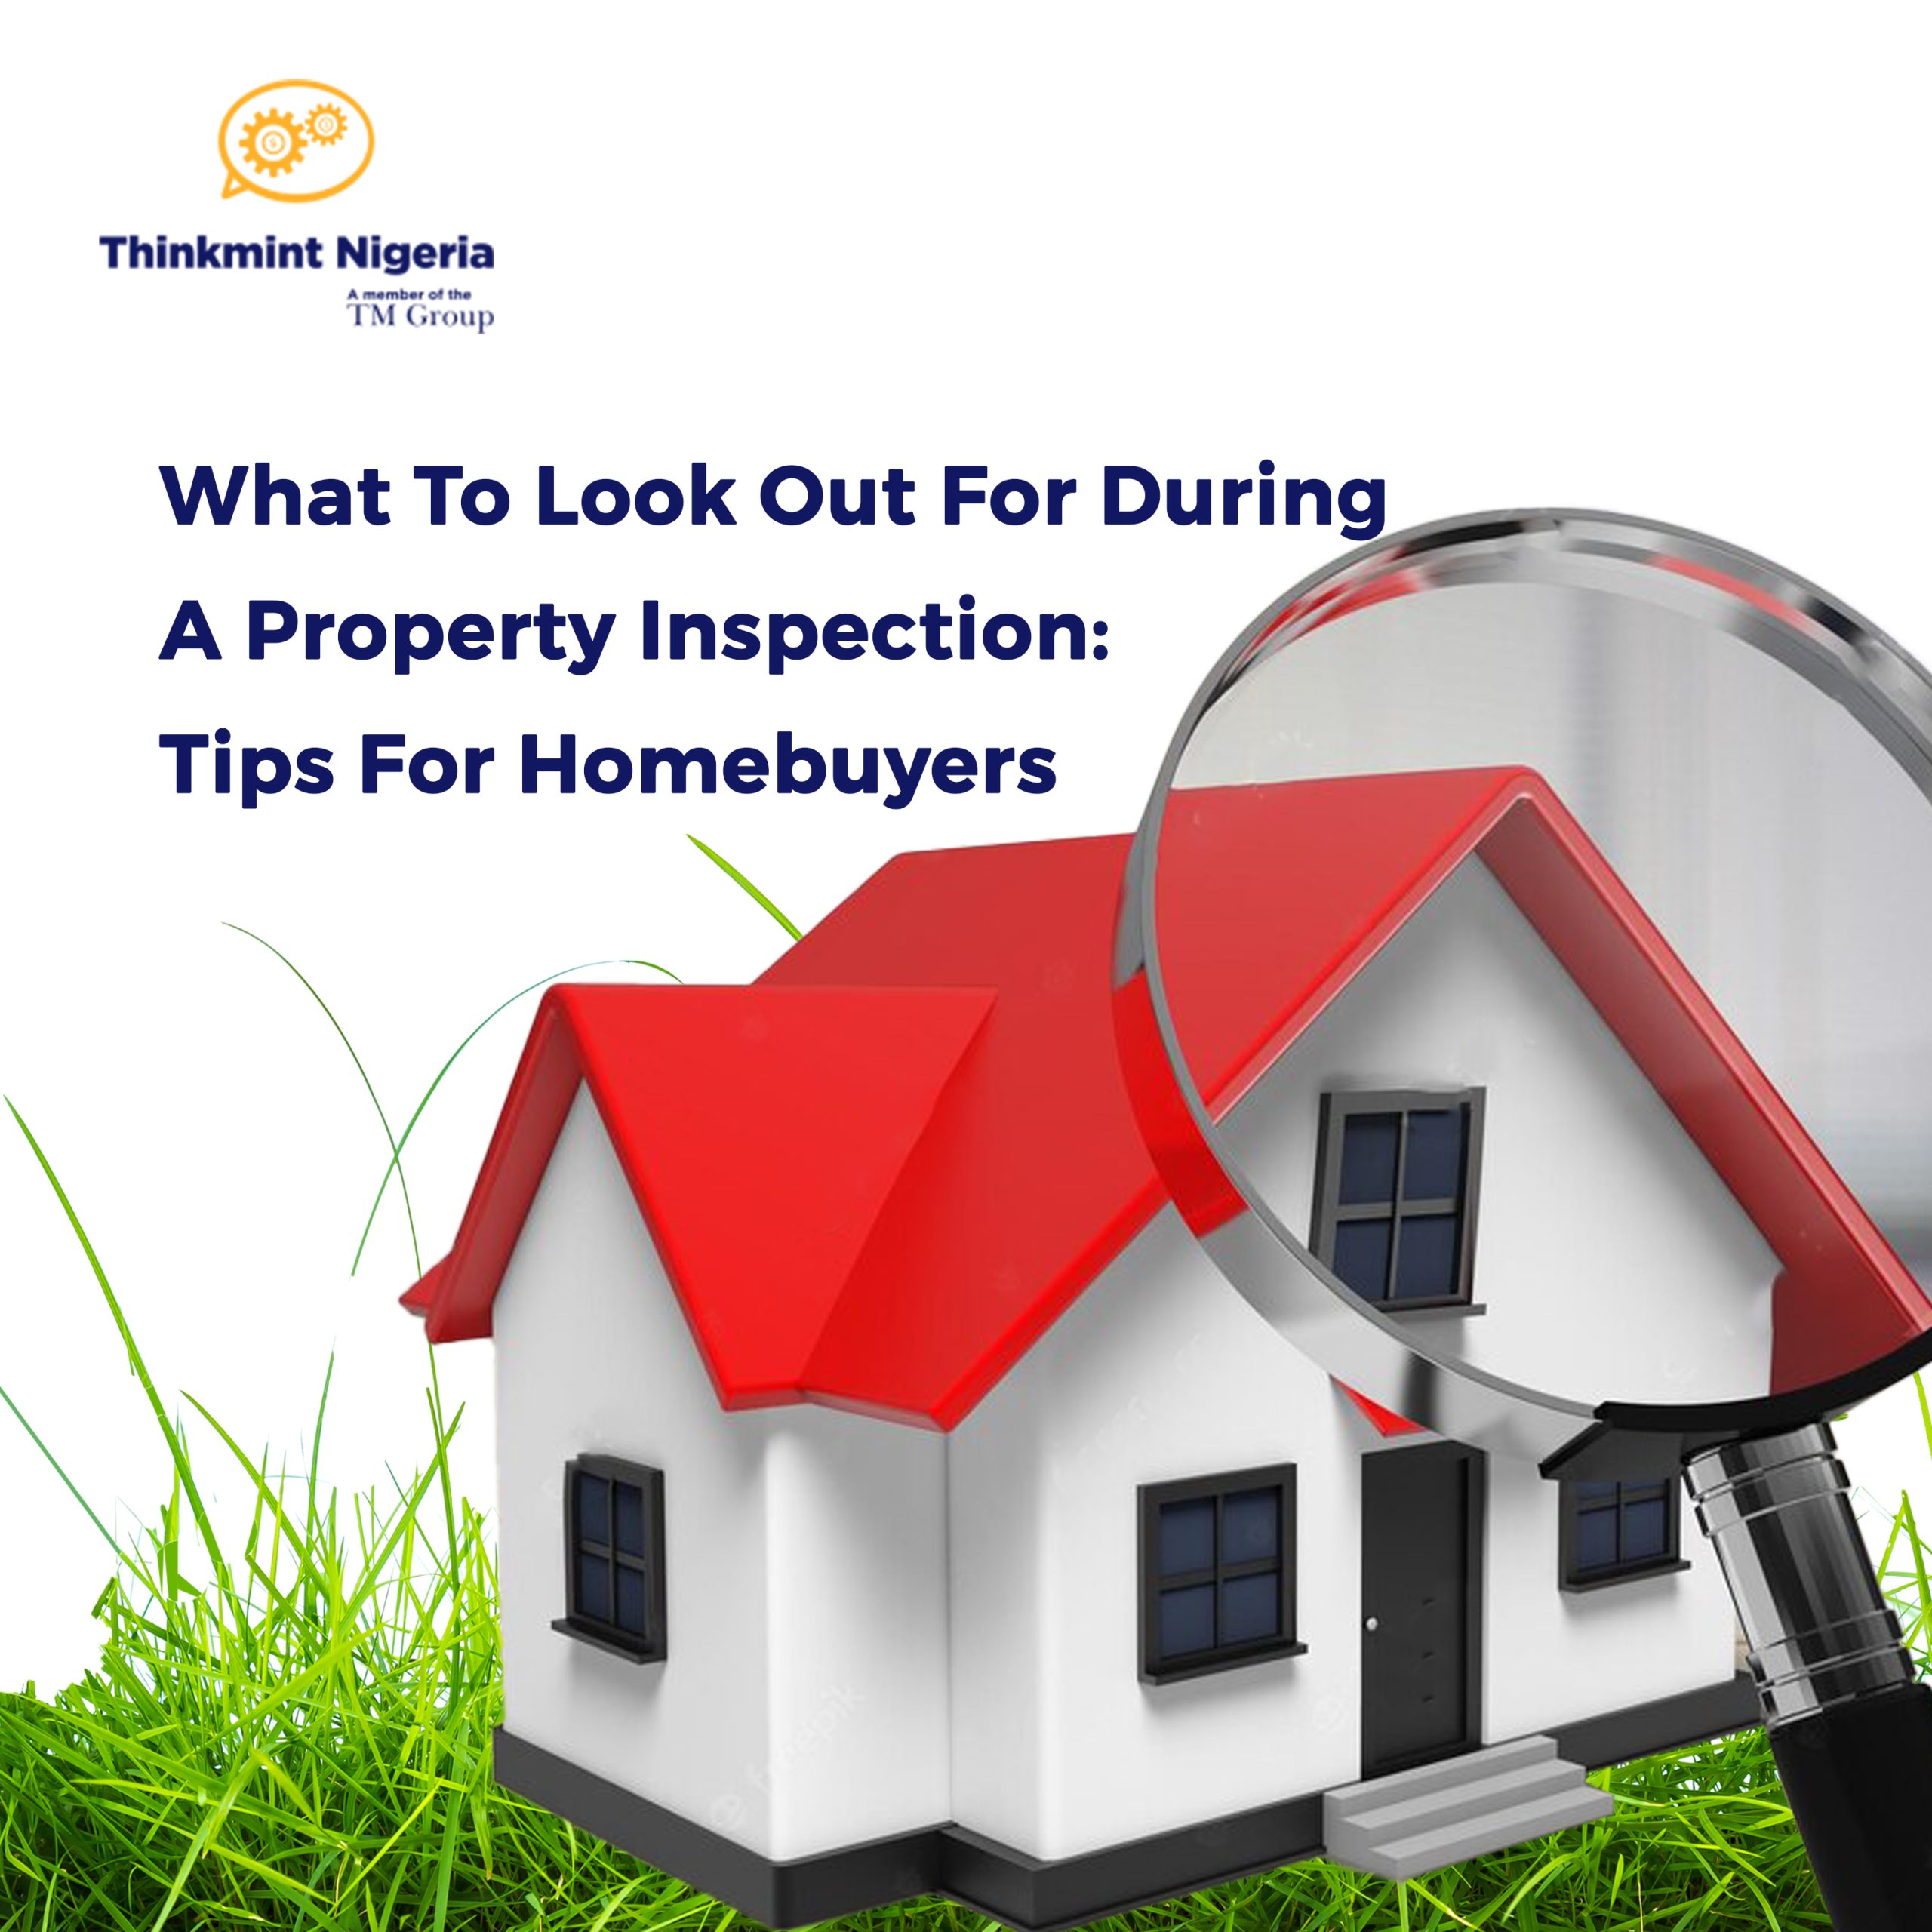 What To Look Out For During Property Inspections 5 Tips For Homebuyers